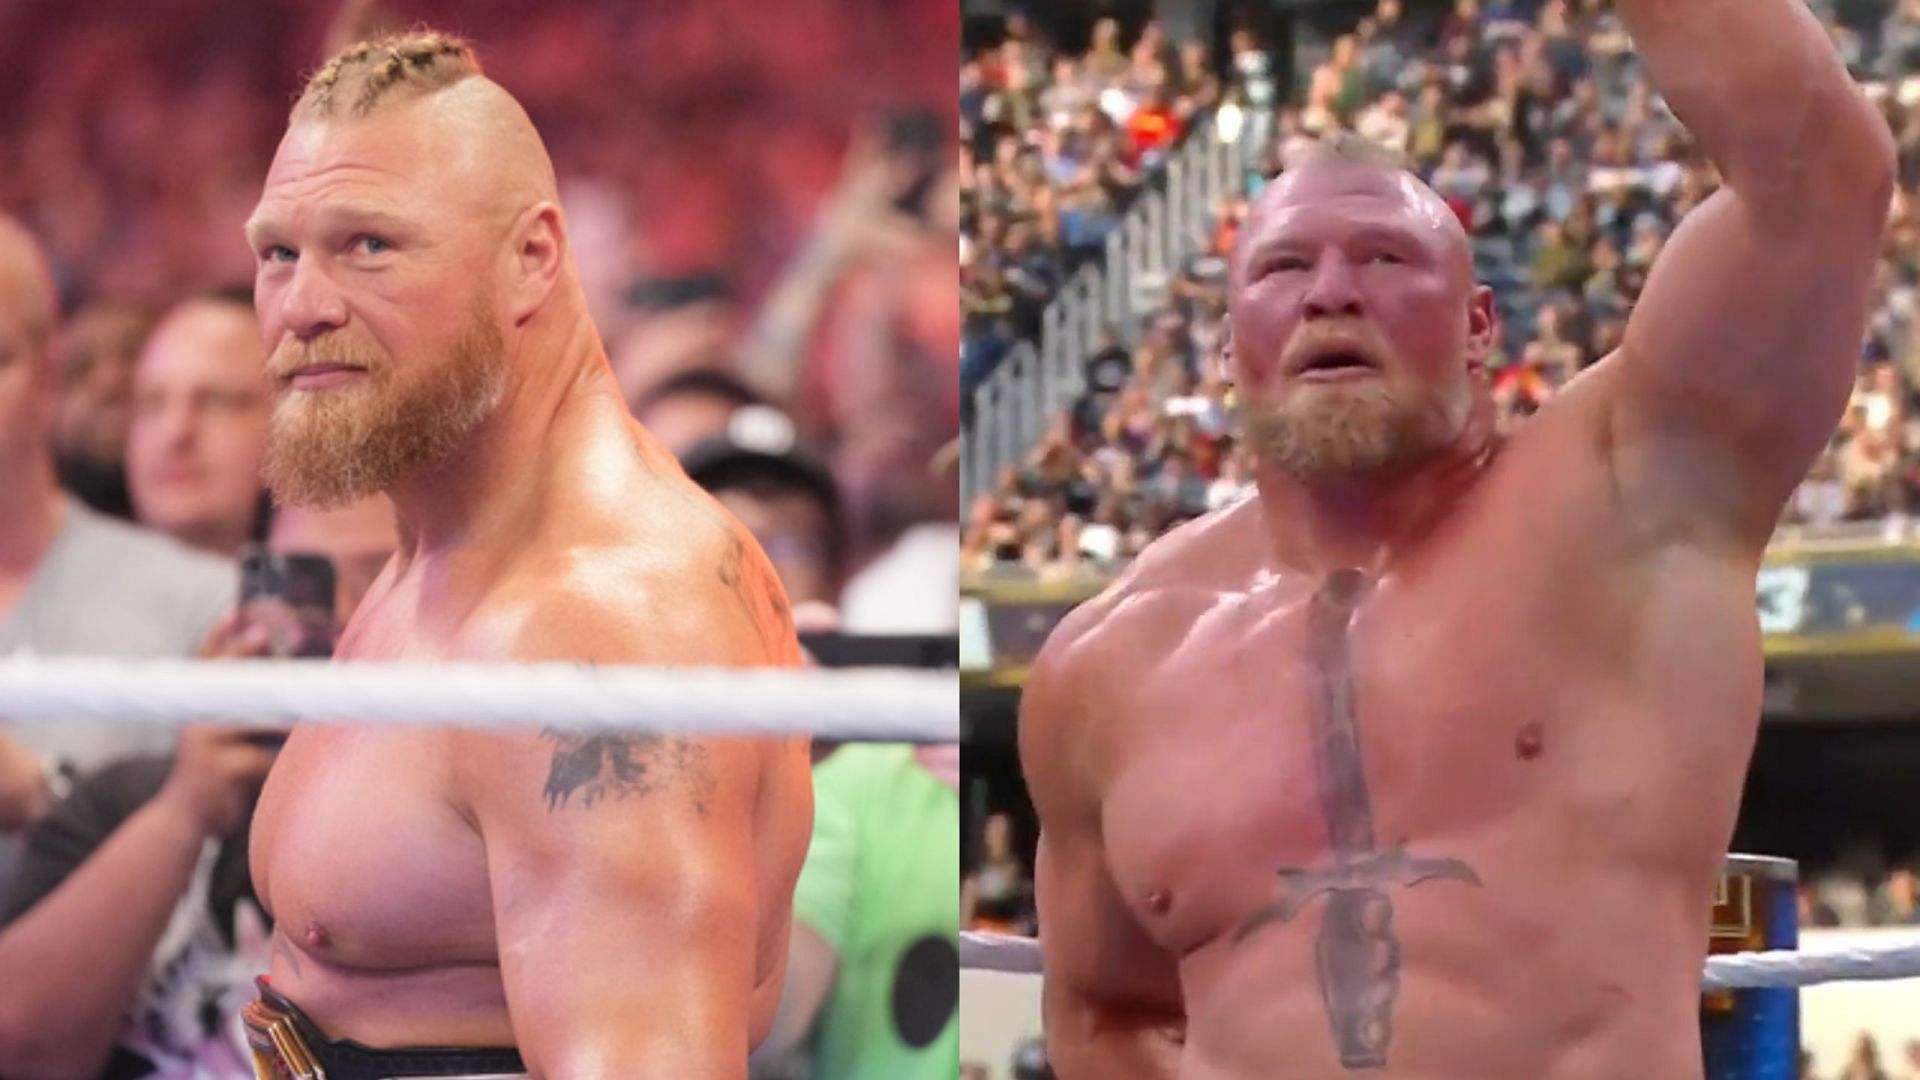 That could be one of the last times we see Brock Lesnar competing